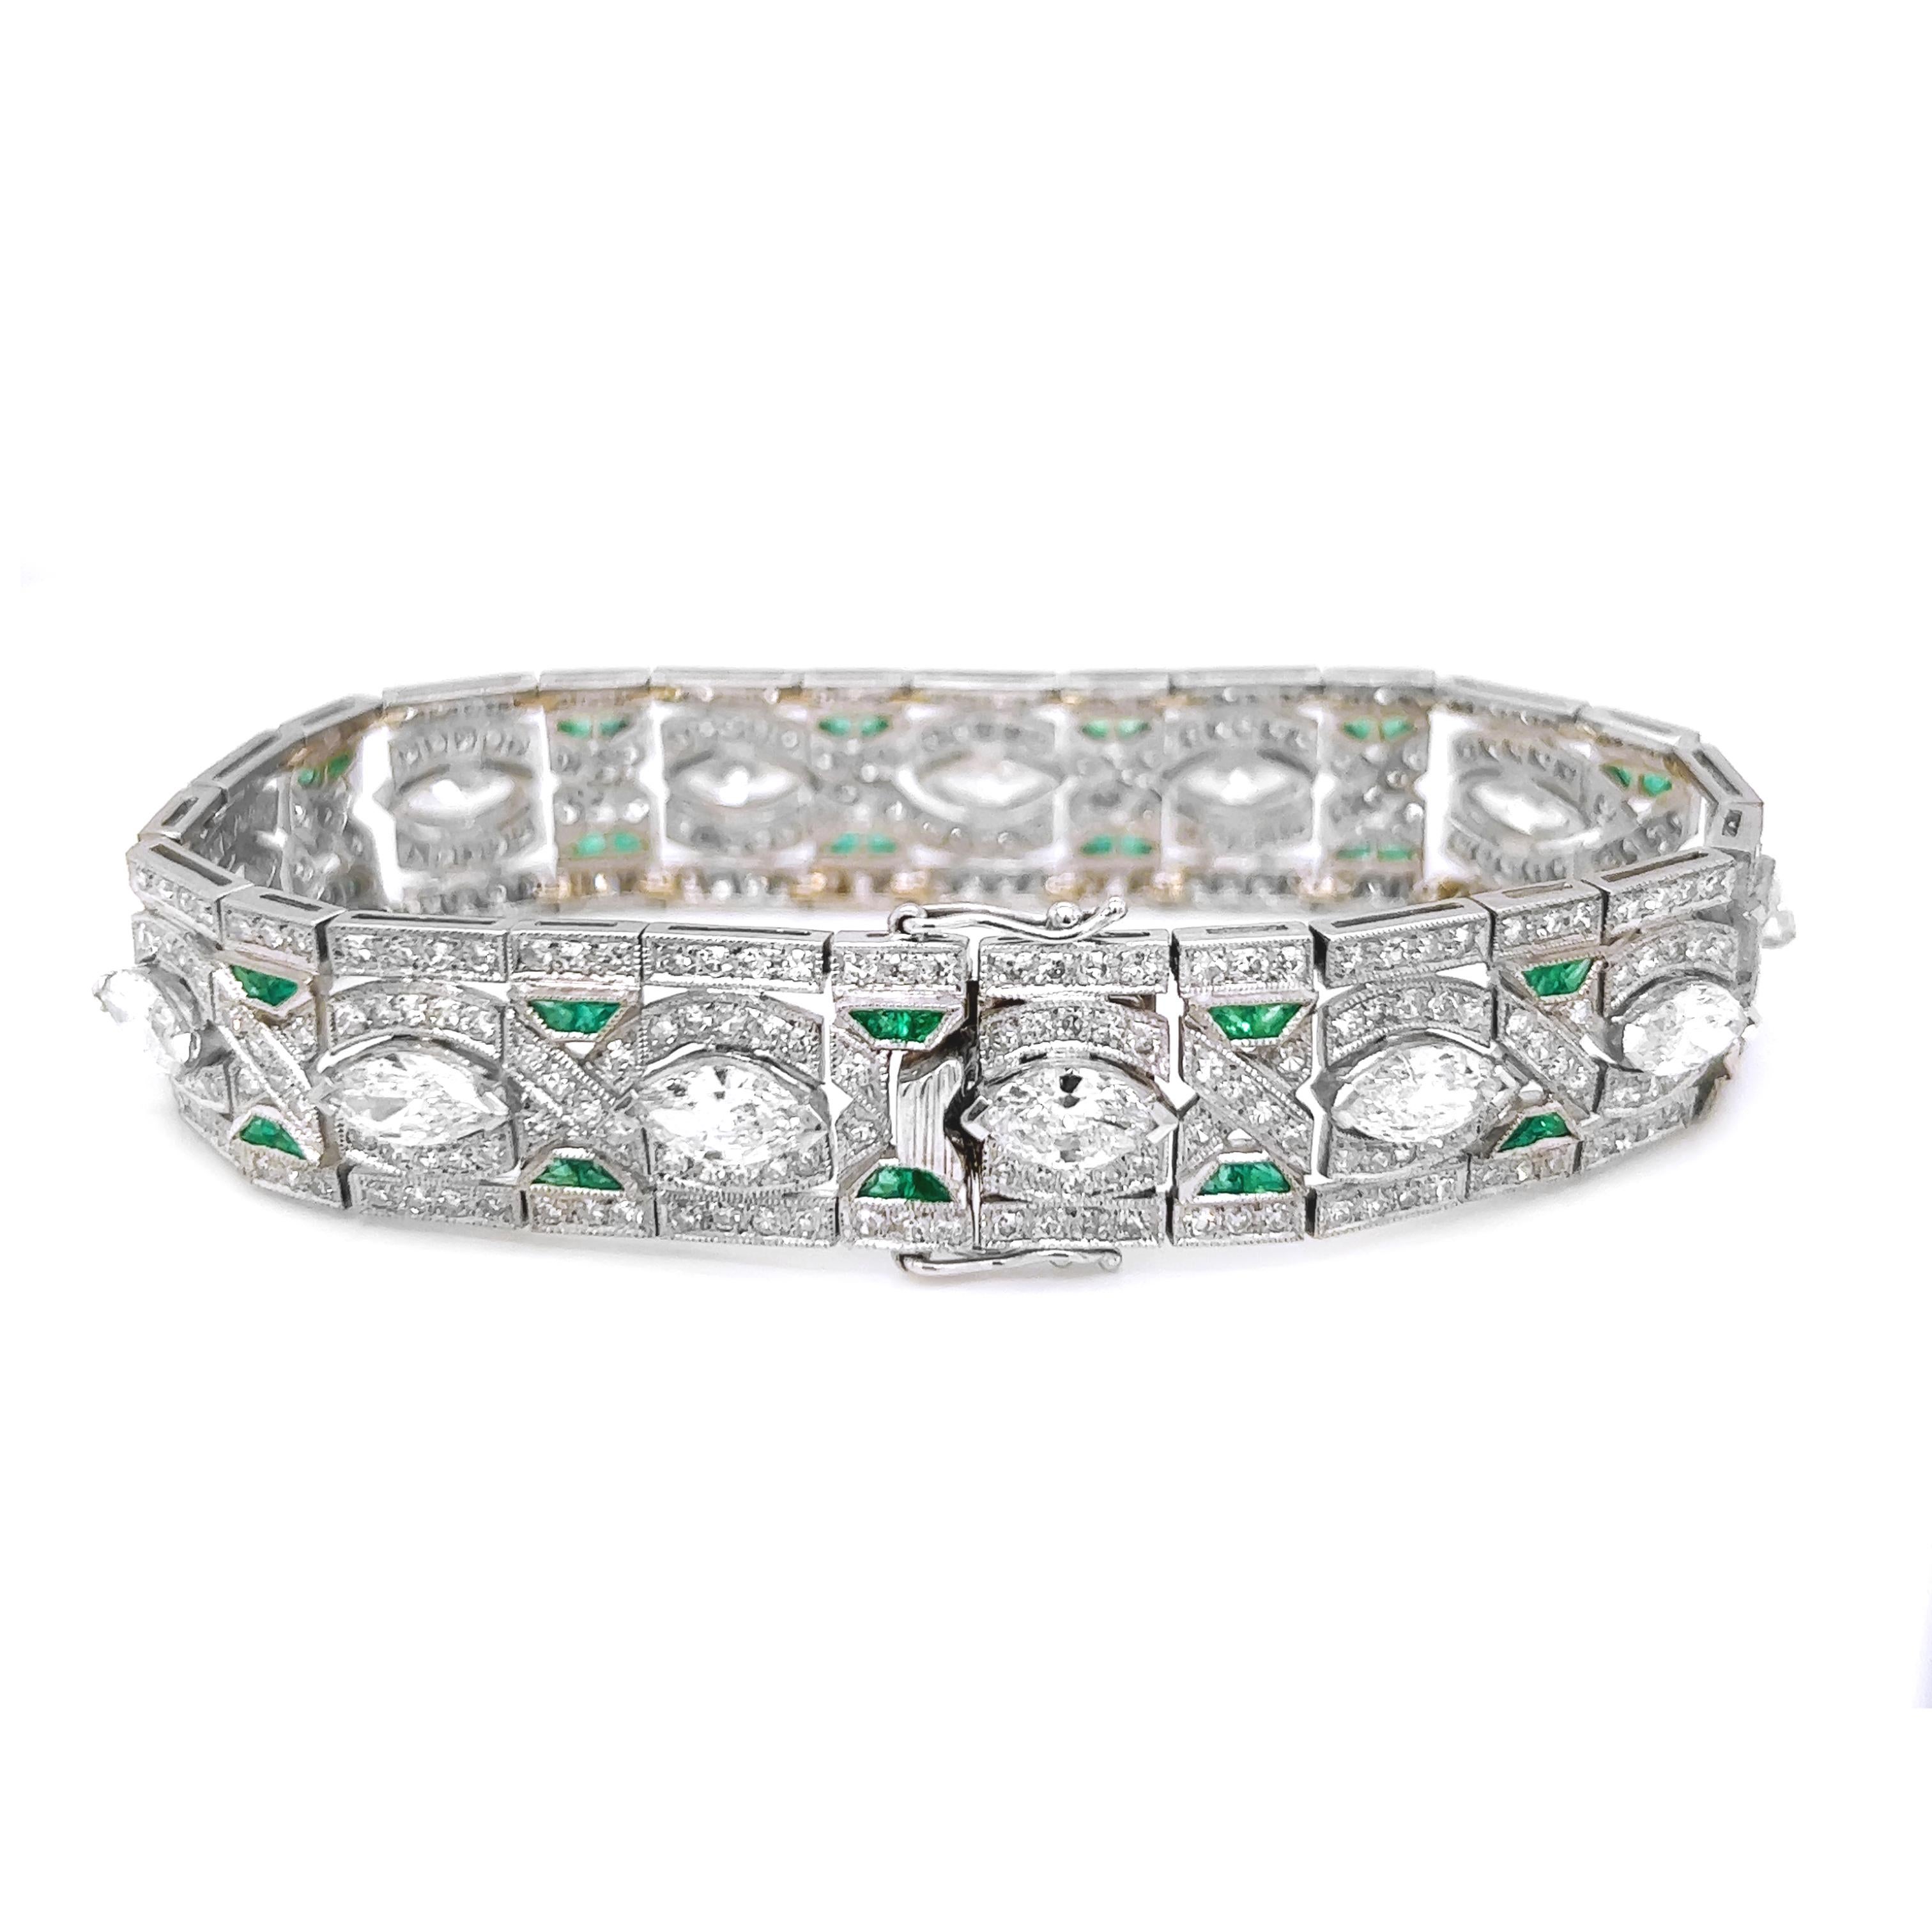 The 13.30 Carat Natural Mined Round Marquise Diamond/Emerald Art Deco Platinum bracelet is an extraordinary piece of jewelry that stands out for several compelling reasons:

1. Carat Weight- The centerpiece of this ring is a substantial 13.30-carat